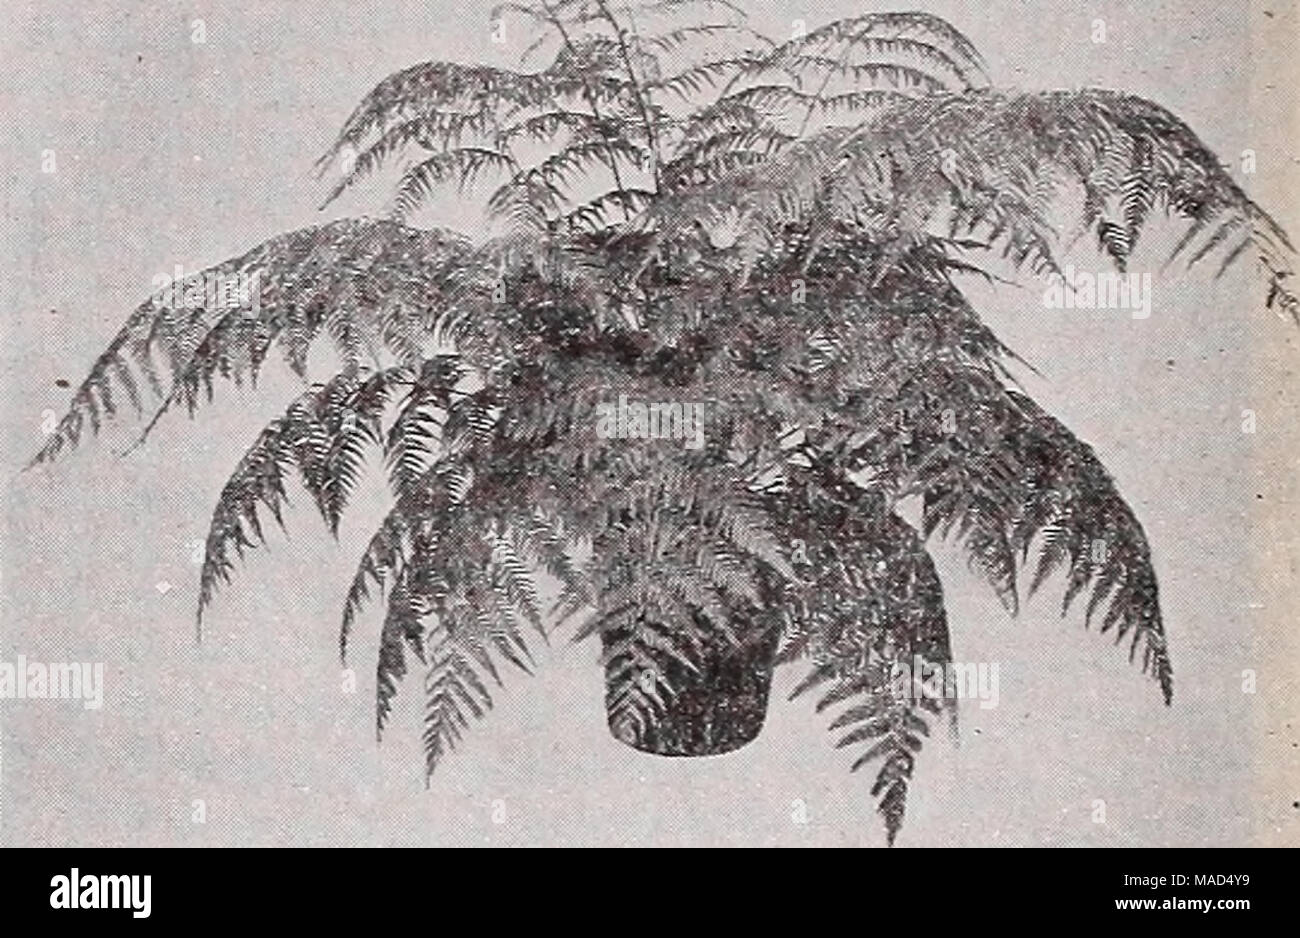 . Dreer's wholesale catalog for florists and market gardeners : 1939 winter spring summer . Cibotlum Schiedei Cibotium Schiedei—Mexican Tree Fern The King of Decorative Plants One of the most desirable and most valuable Ferns for room and window decoration. Grows to considerable size and is very attractive with its lovely large fronds of a beautiful light green color. An attractive lot of strong specimen plants. 10-inch tubs $6.00 each. Special prices for quantity lots Cyrtomium Rochfordianum compactum The Improved Holly Fern The Holly Fern Is one of the most satisfactory for home and apartmen Stock Photo